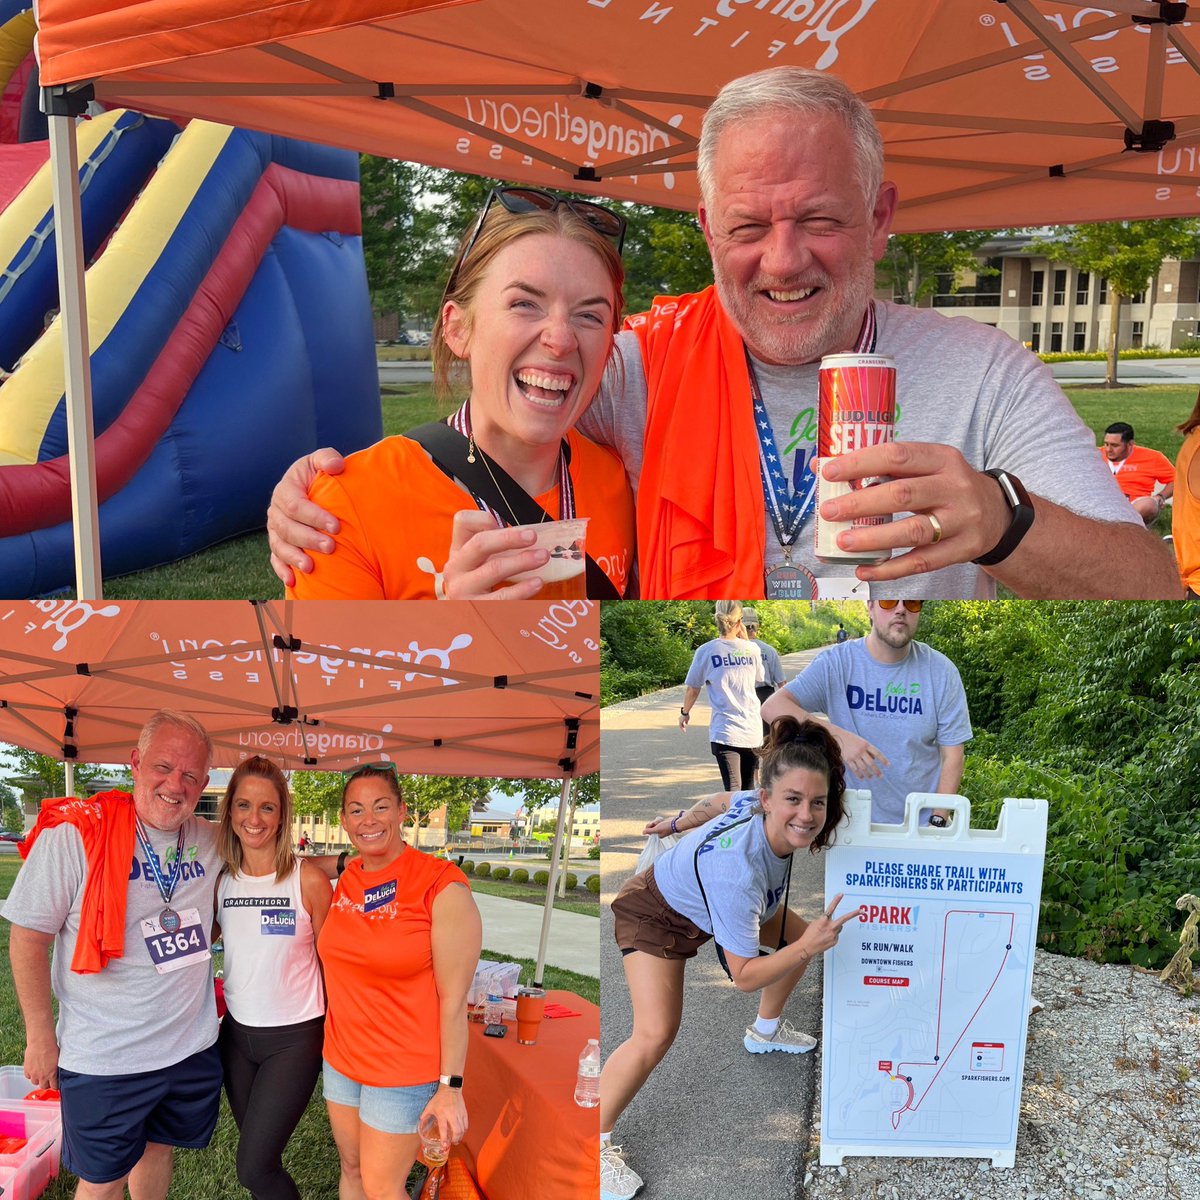 What an awesome night in @FishersIN Indiana!  I don’t think we won the @SparkFishers 5k, but we had a blast. It was awesome to catch up with @orangetheory friends as well.